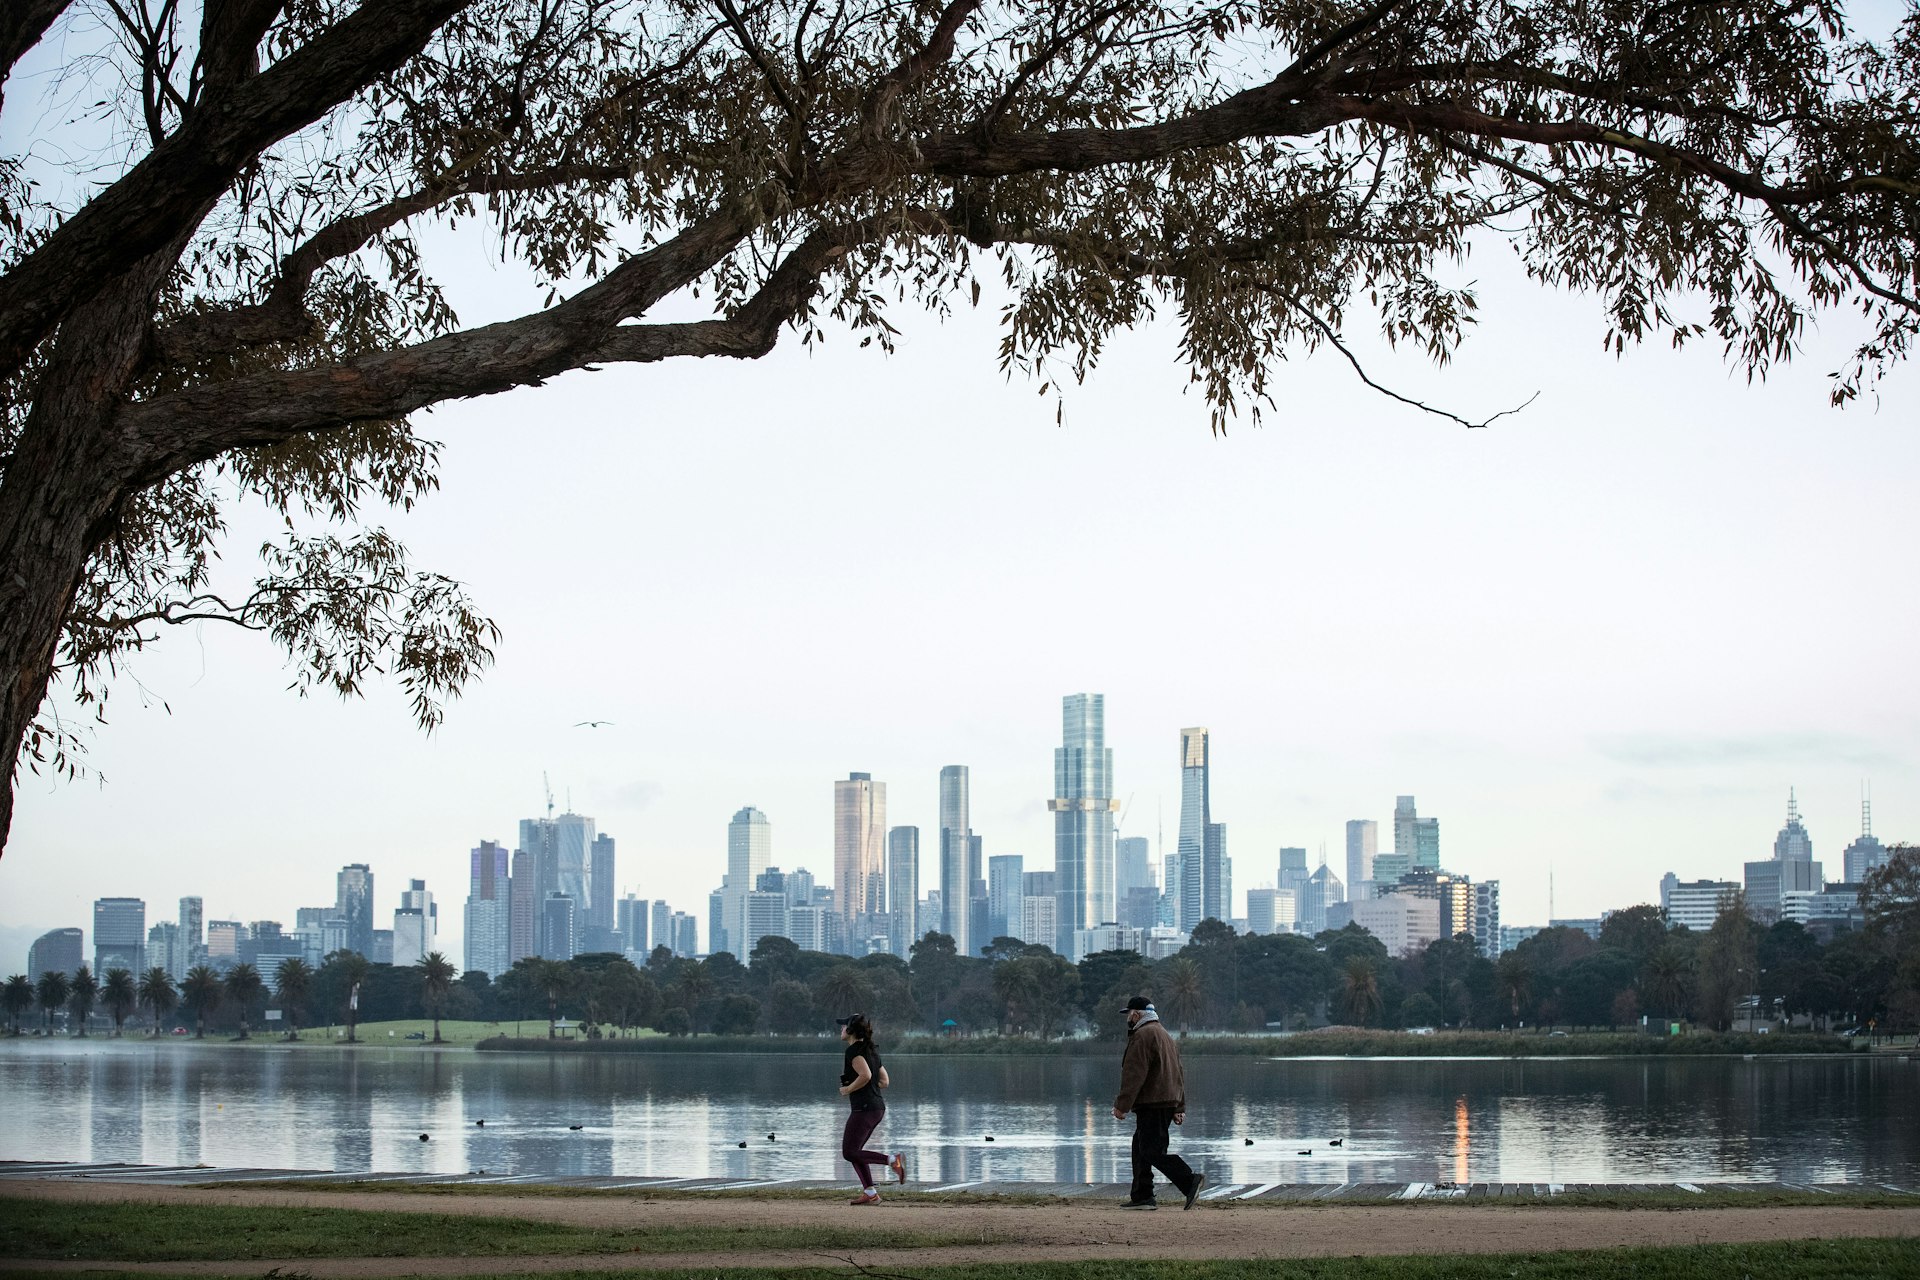 A jogger makes their way around a track in Albert Park Lake. Behind them is the large lake, and beyond that the skyline of central Melbourne.